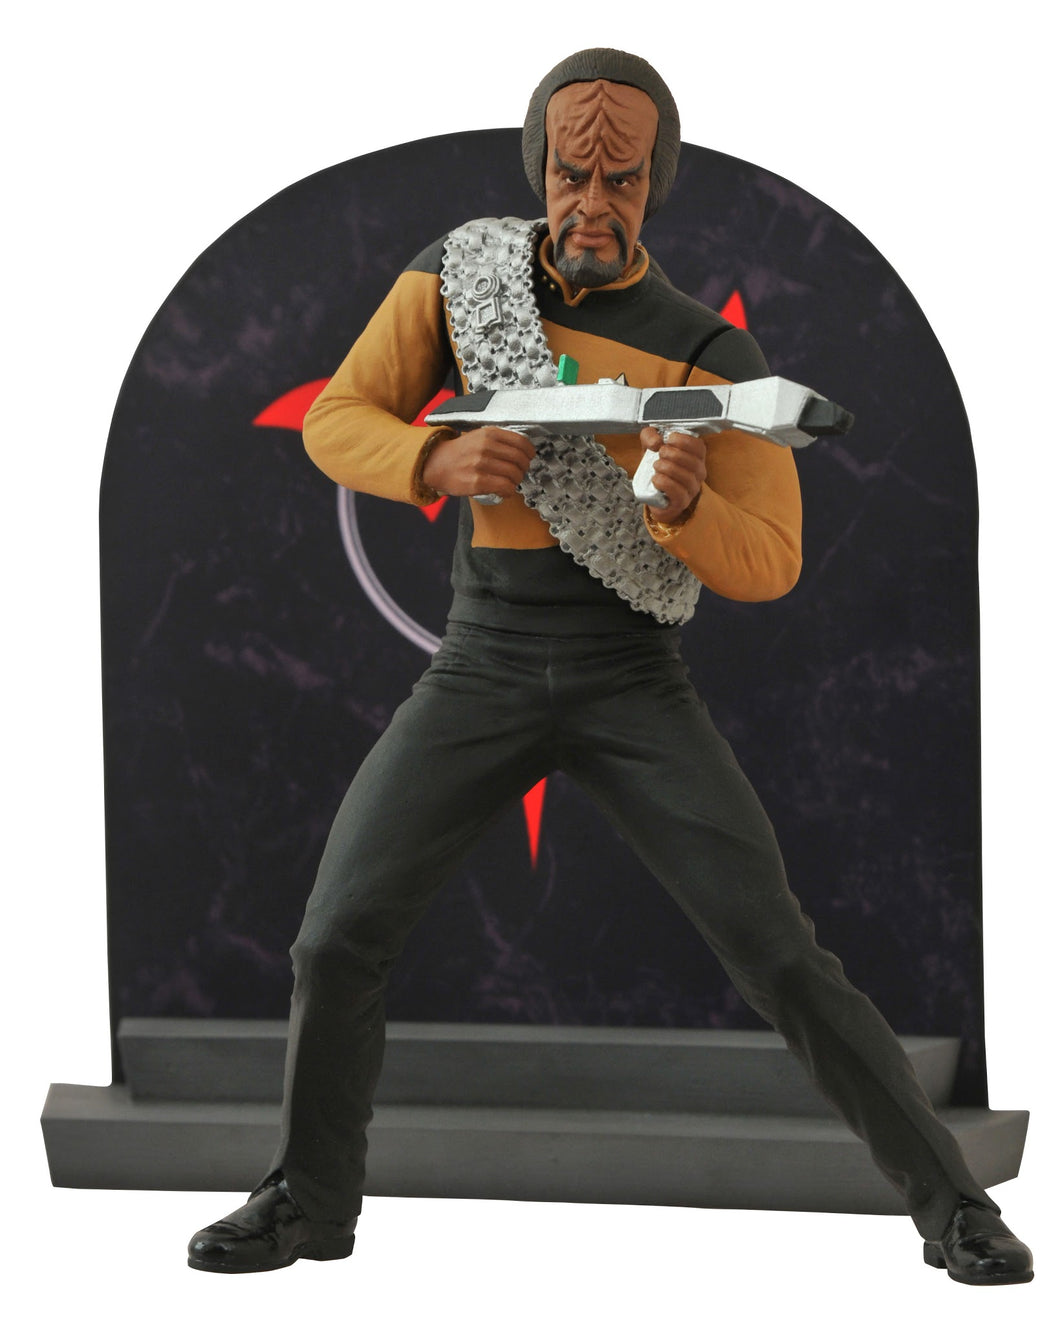 Star Trek TNG Worf Action Figure - with phaser